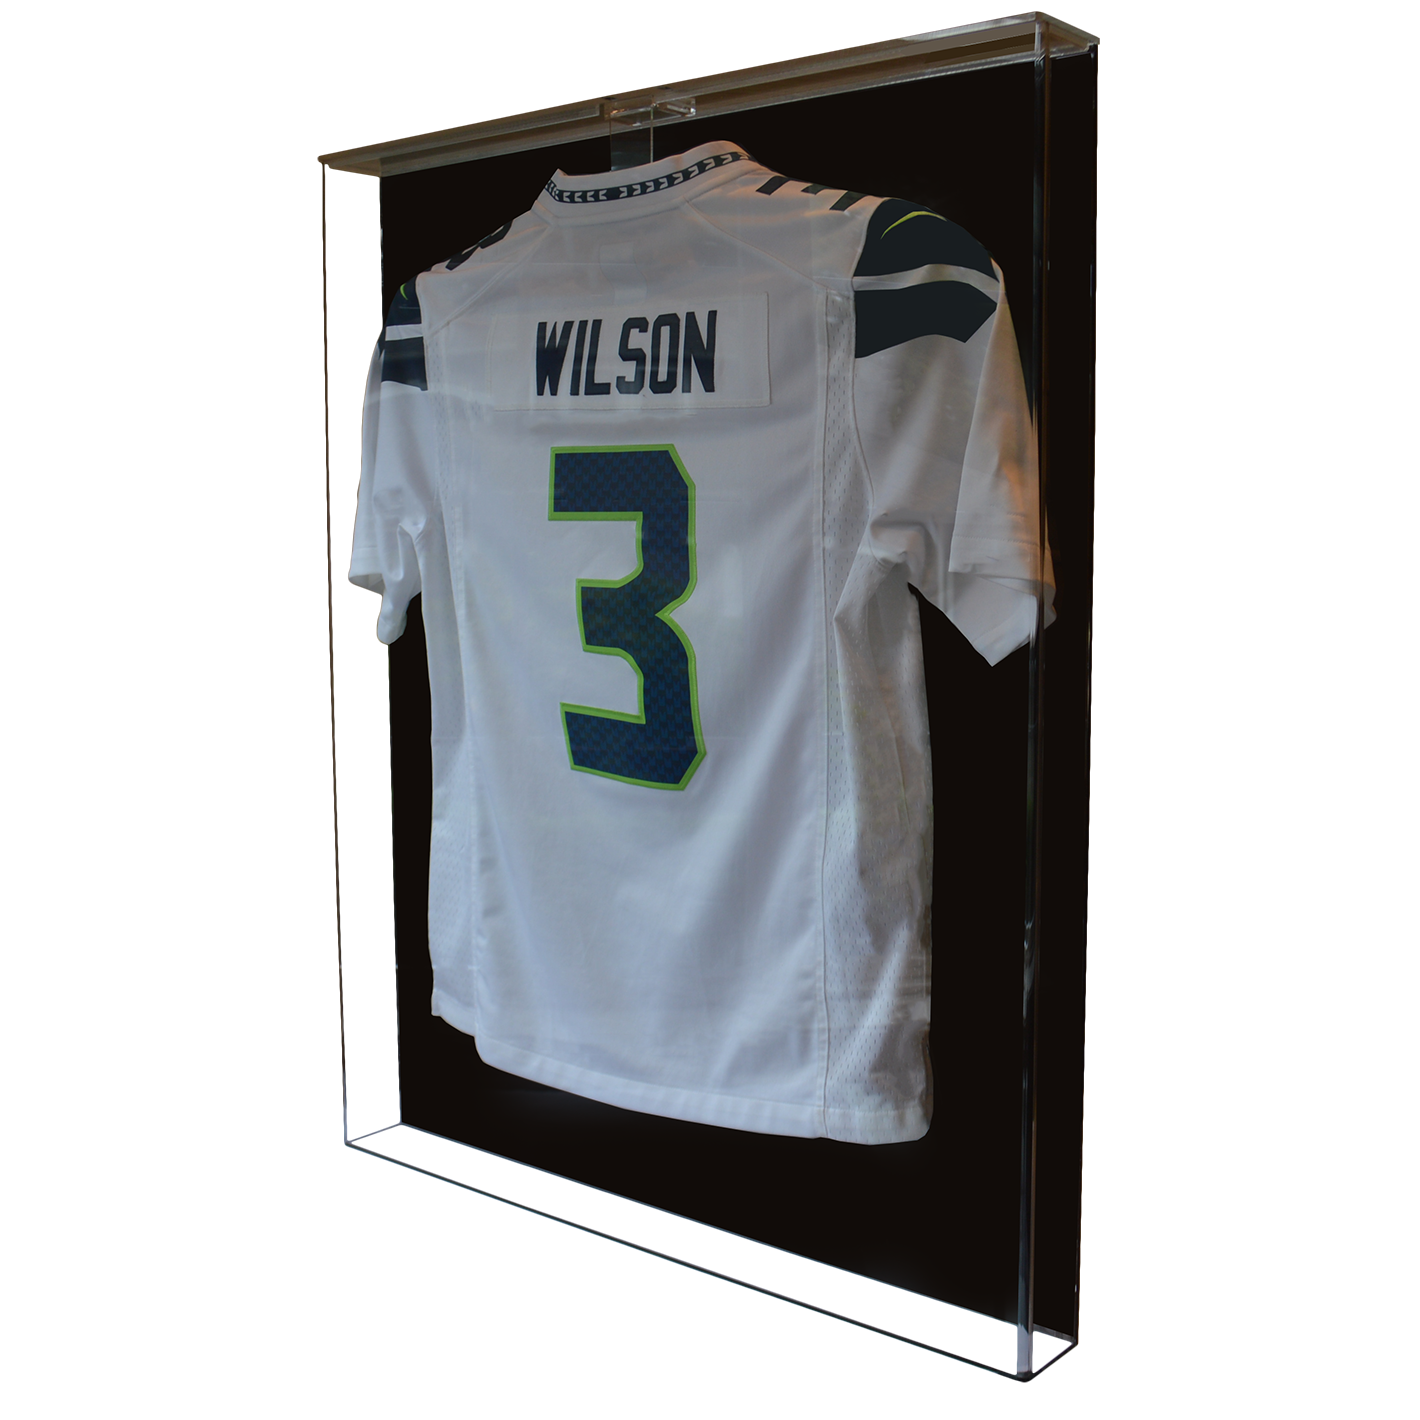 Small Jersey, T-shirt, or Uniform Frame Display Case Cabinet